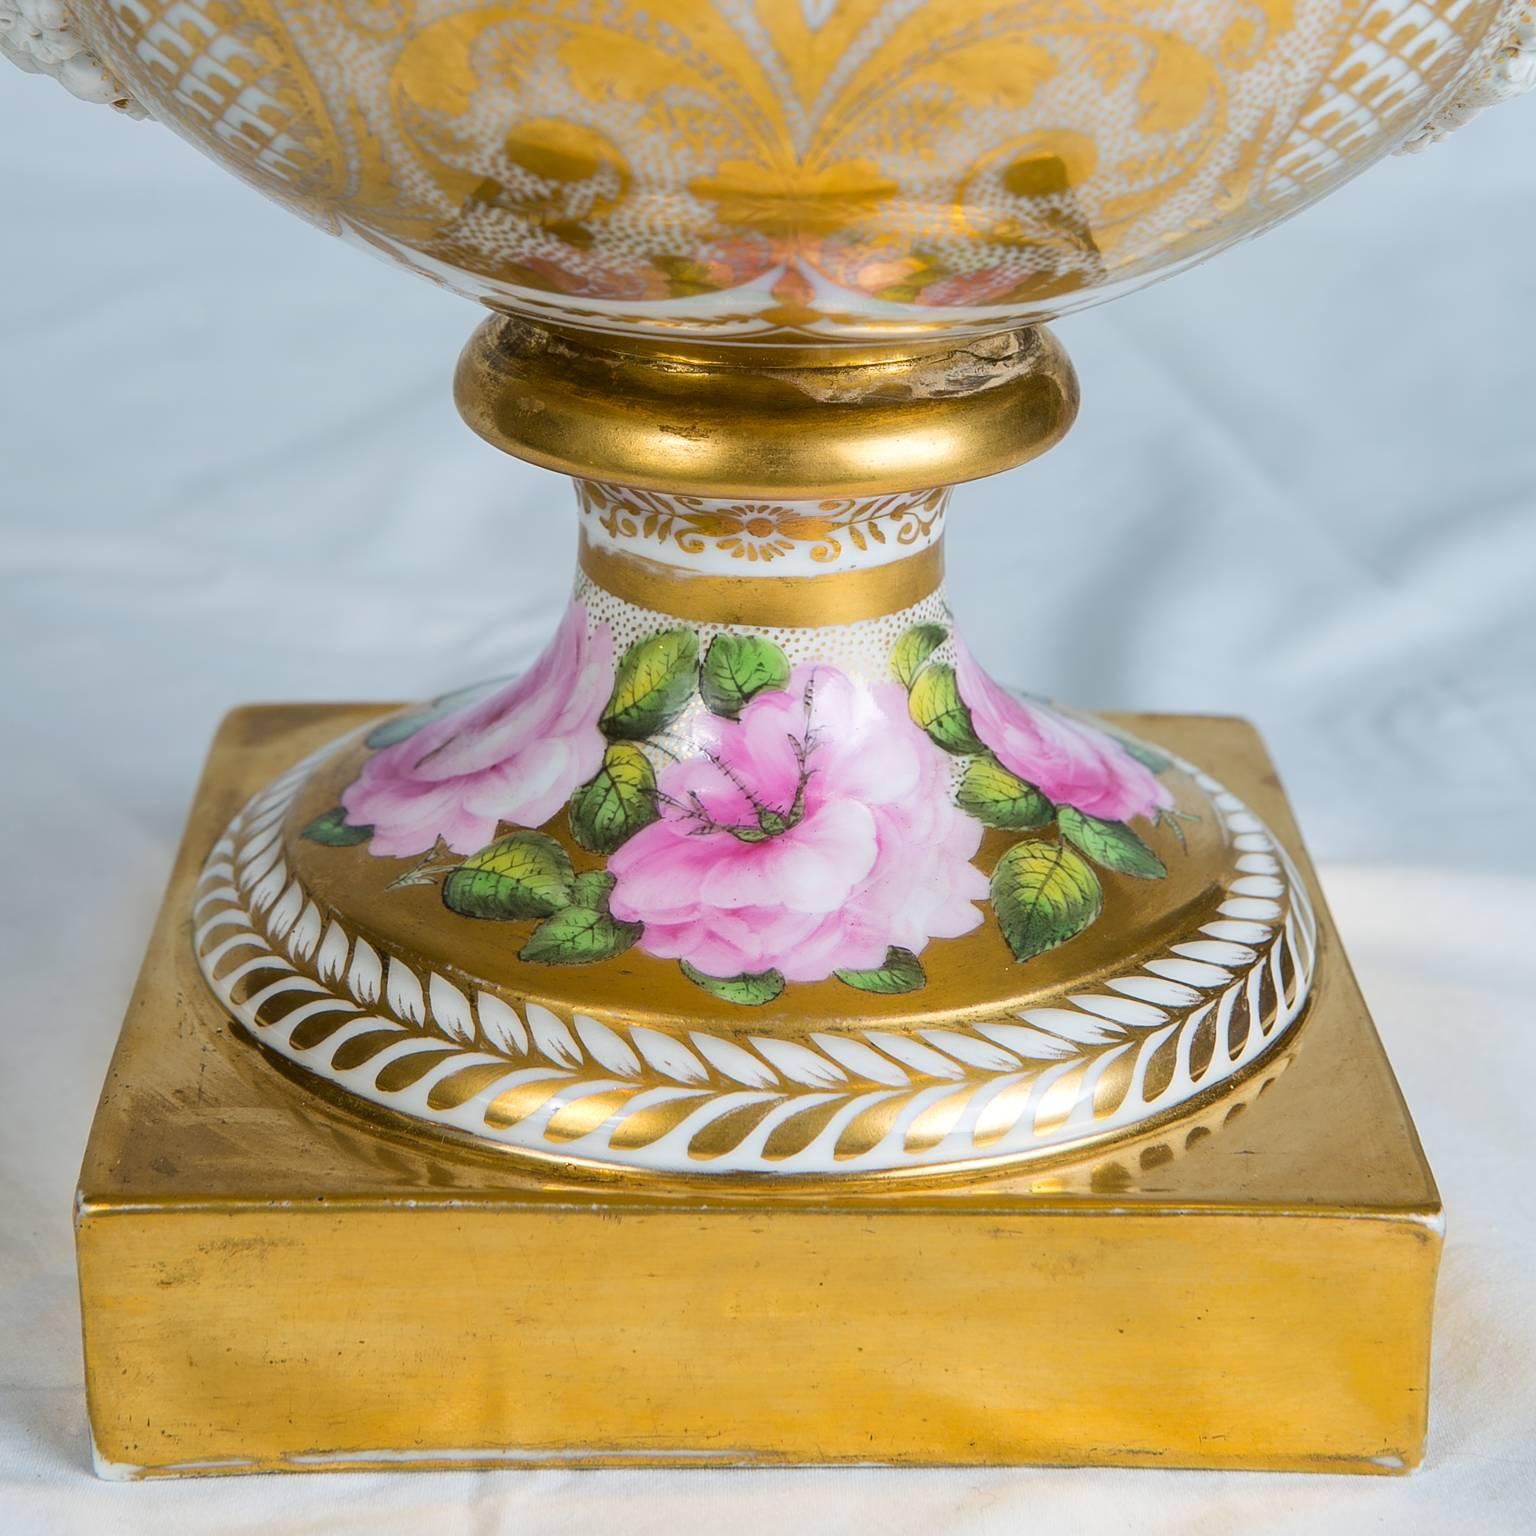 Antique Spode Porcelain Urn Made in England circa 1810 In Excellent Condition For Sale In Katonah, NY